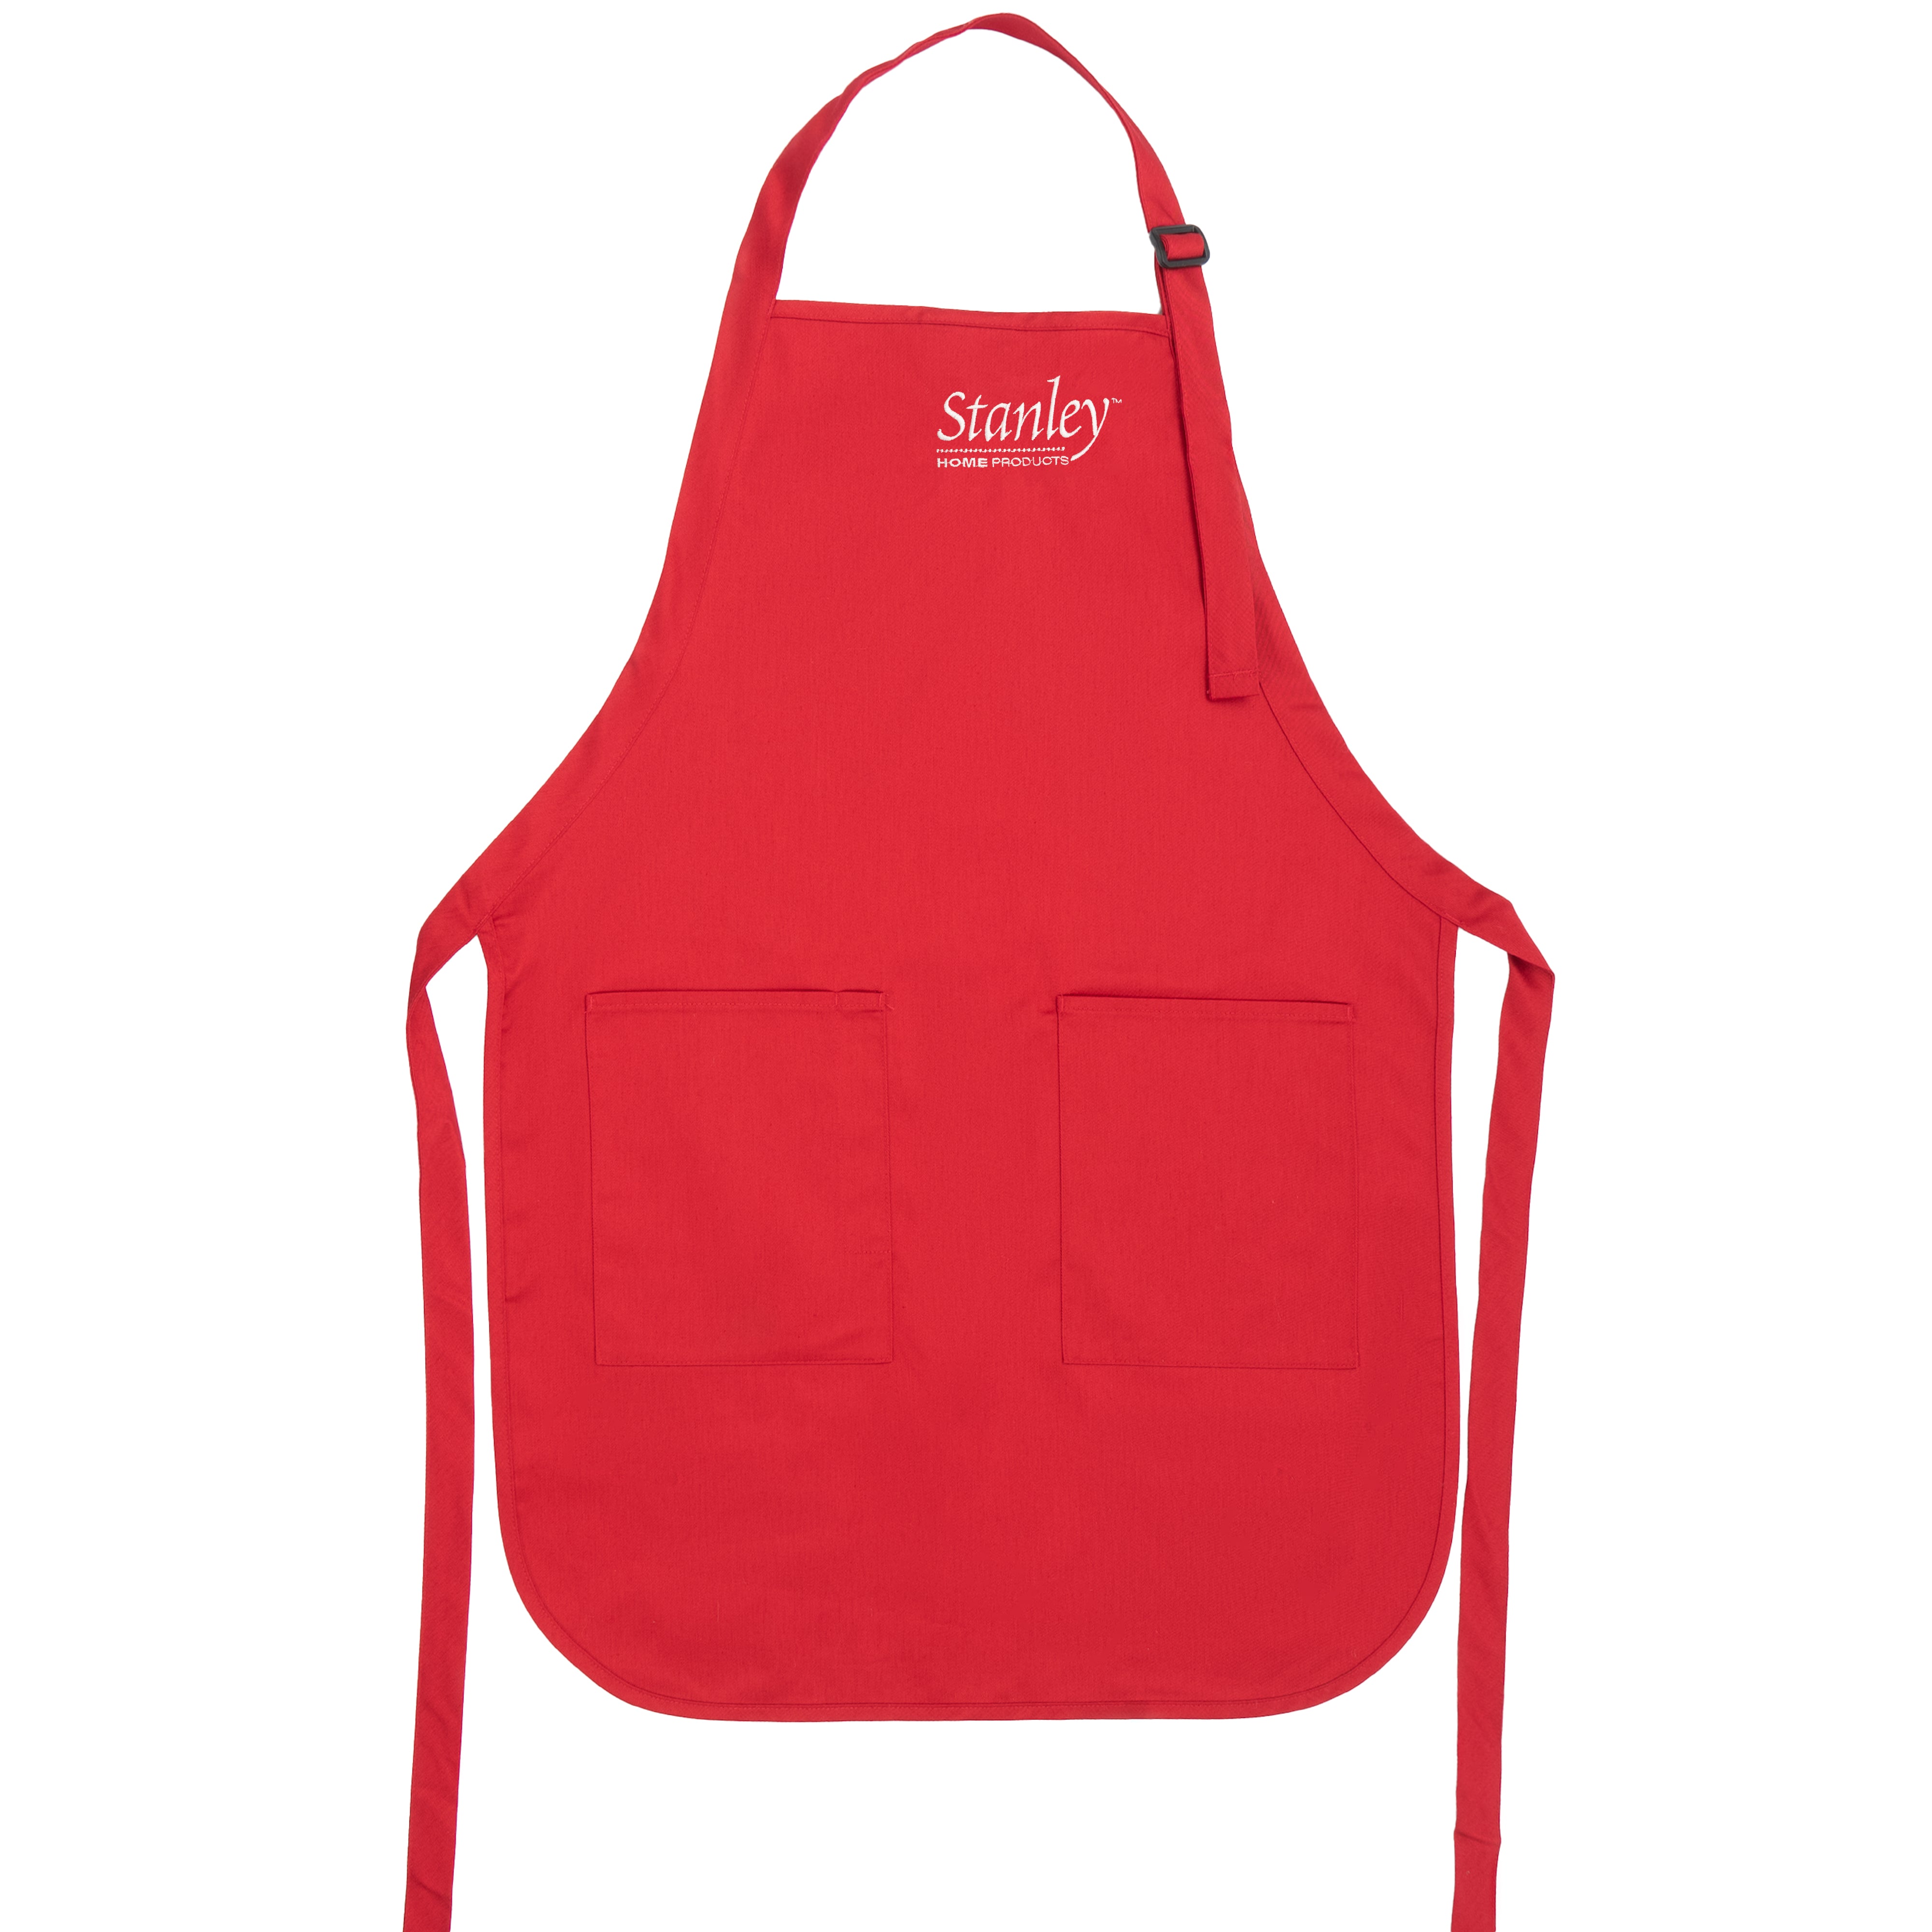 Stanley Red Kitchen Apron with Stanley Logo